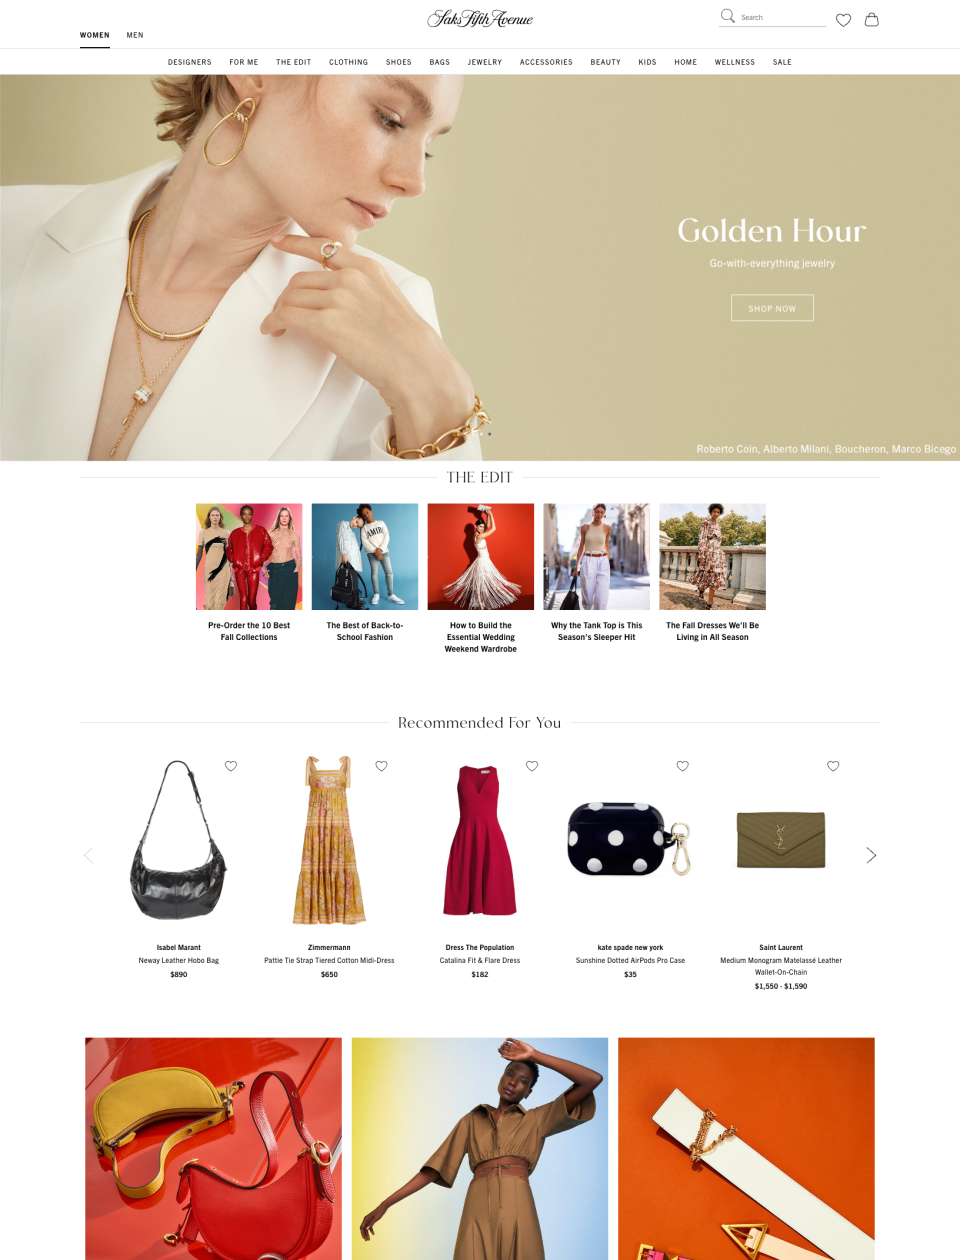 A view of the saks.com homepage.